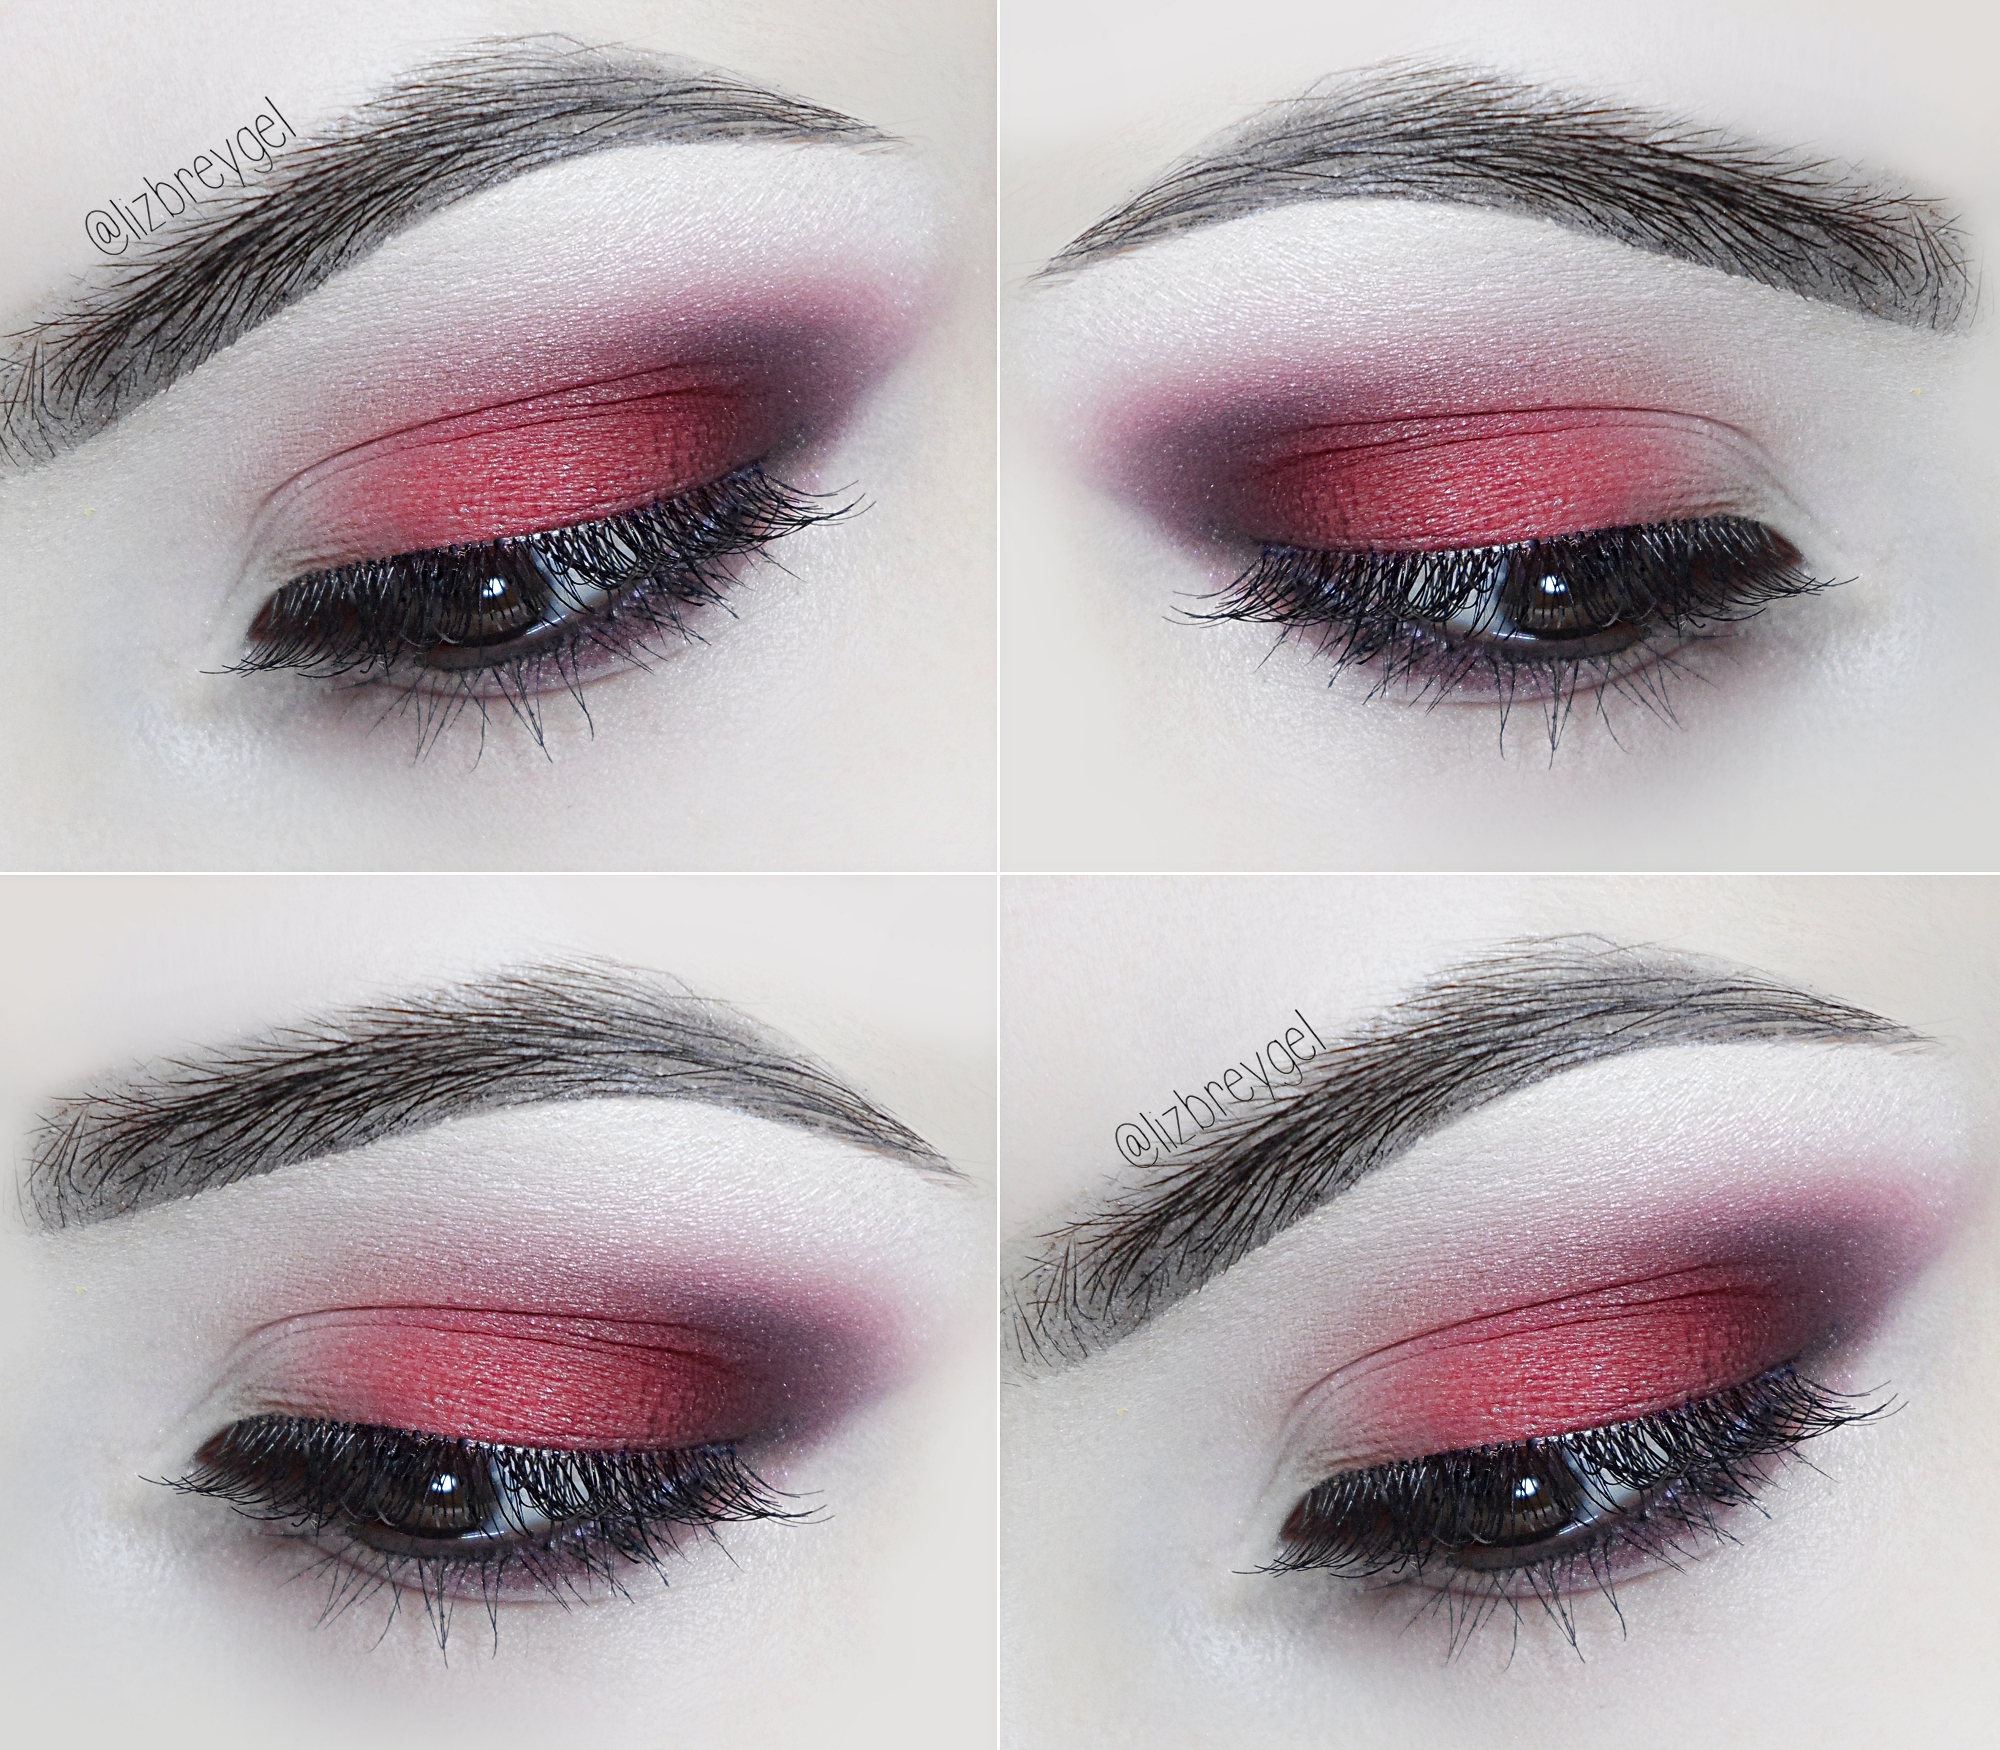 a close-up of an eye with red smoky makeup look and false lashes